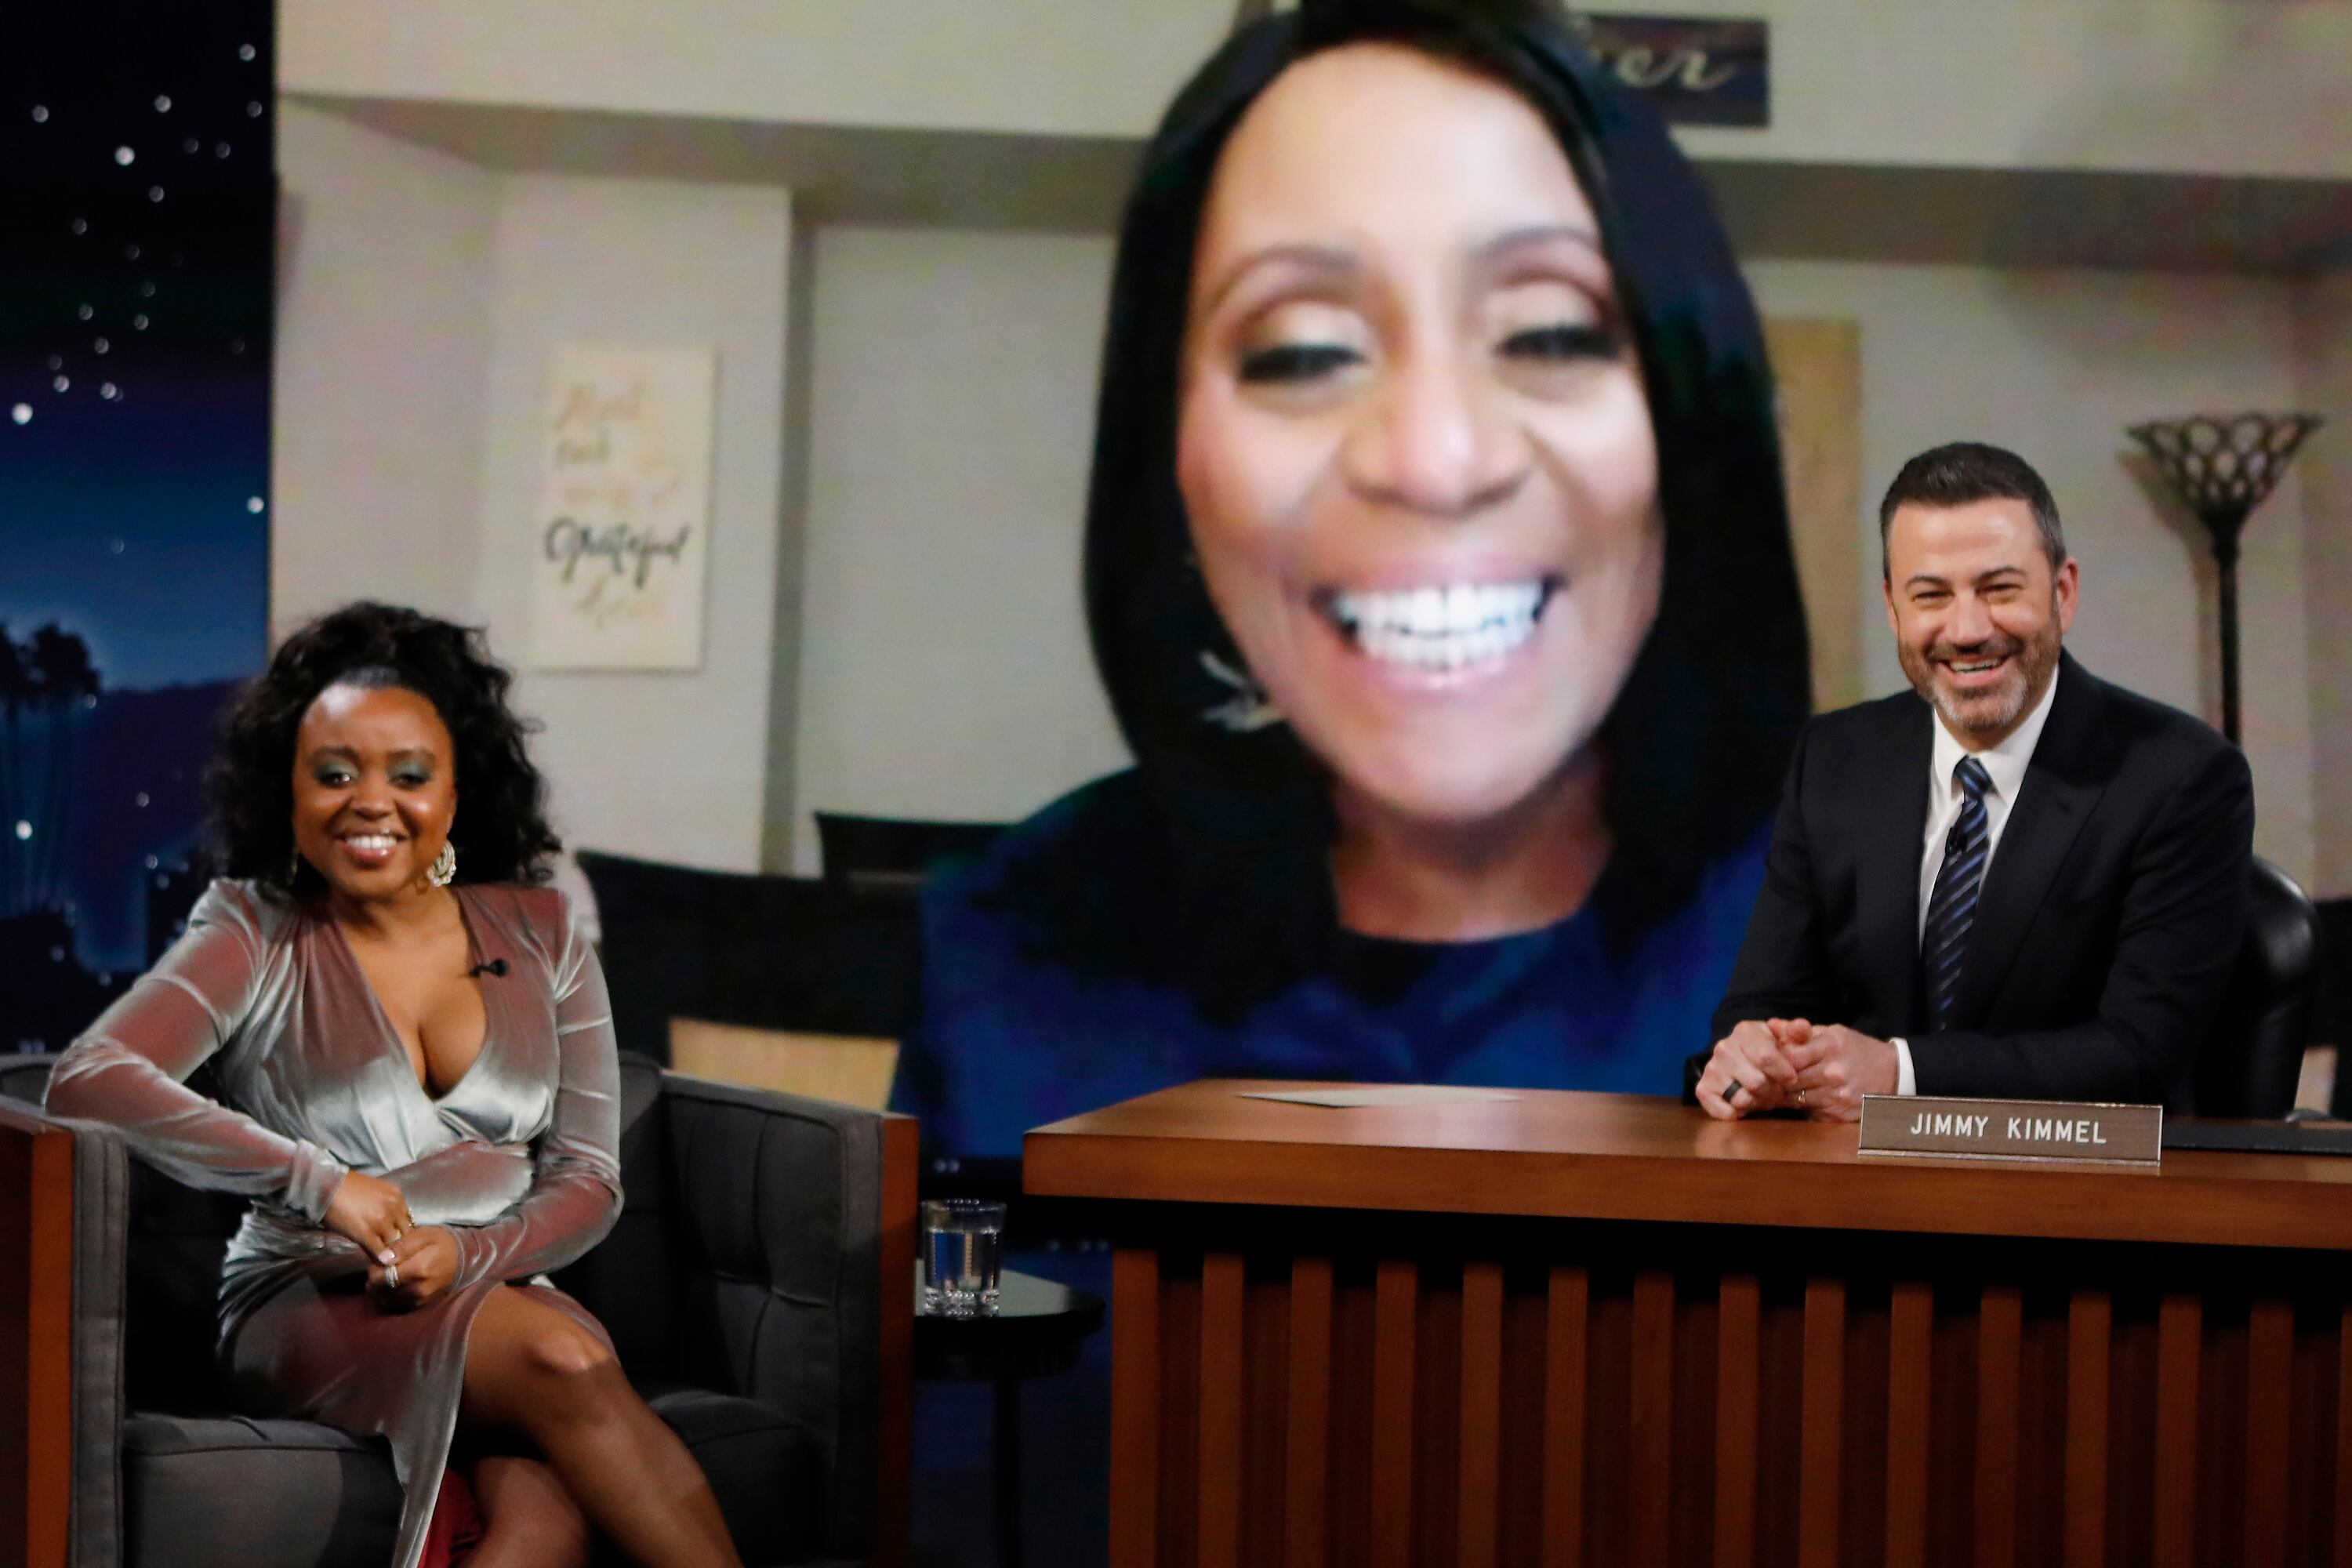 Jimmy Kimmel, right, surprises Quinta Brunson with her former teacher Joyce Abbott, who appeared on a screen behind her.